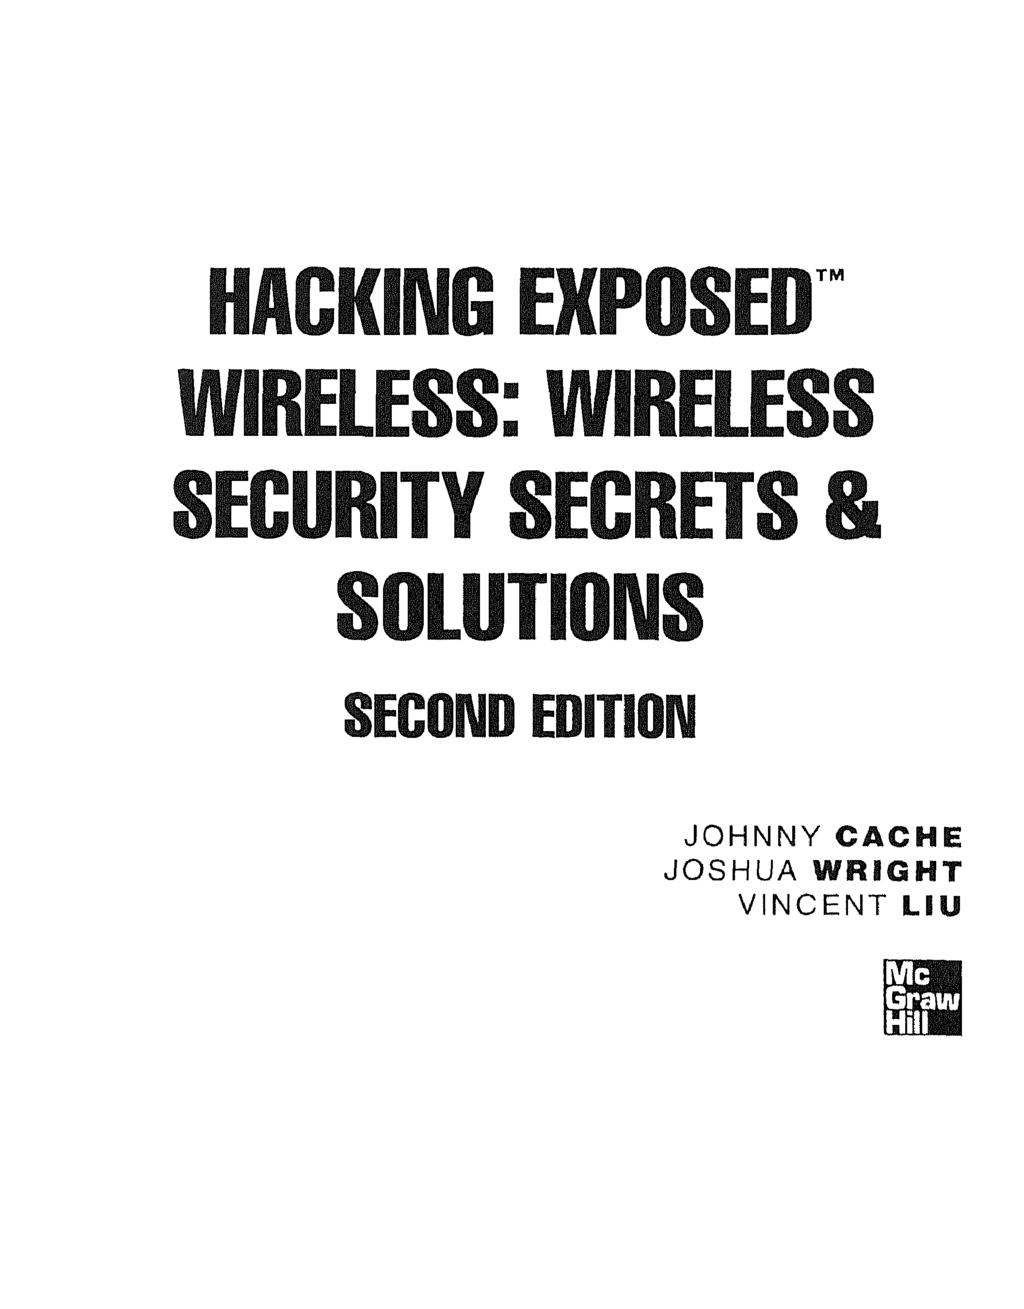 HACKING EXPOSED WIRELESS: WIRELESS SECURITY SECRETS & SOLUTIONS